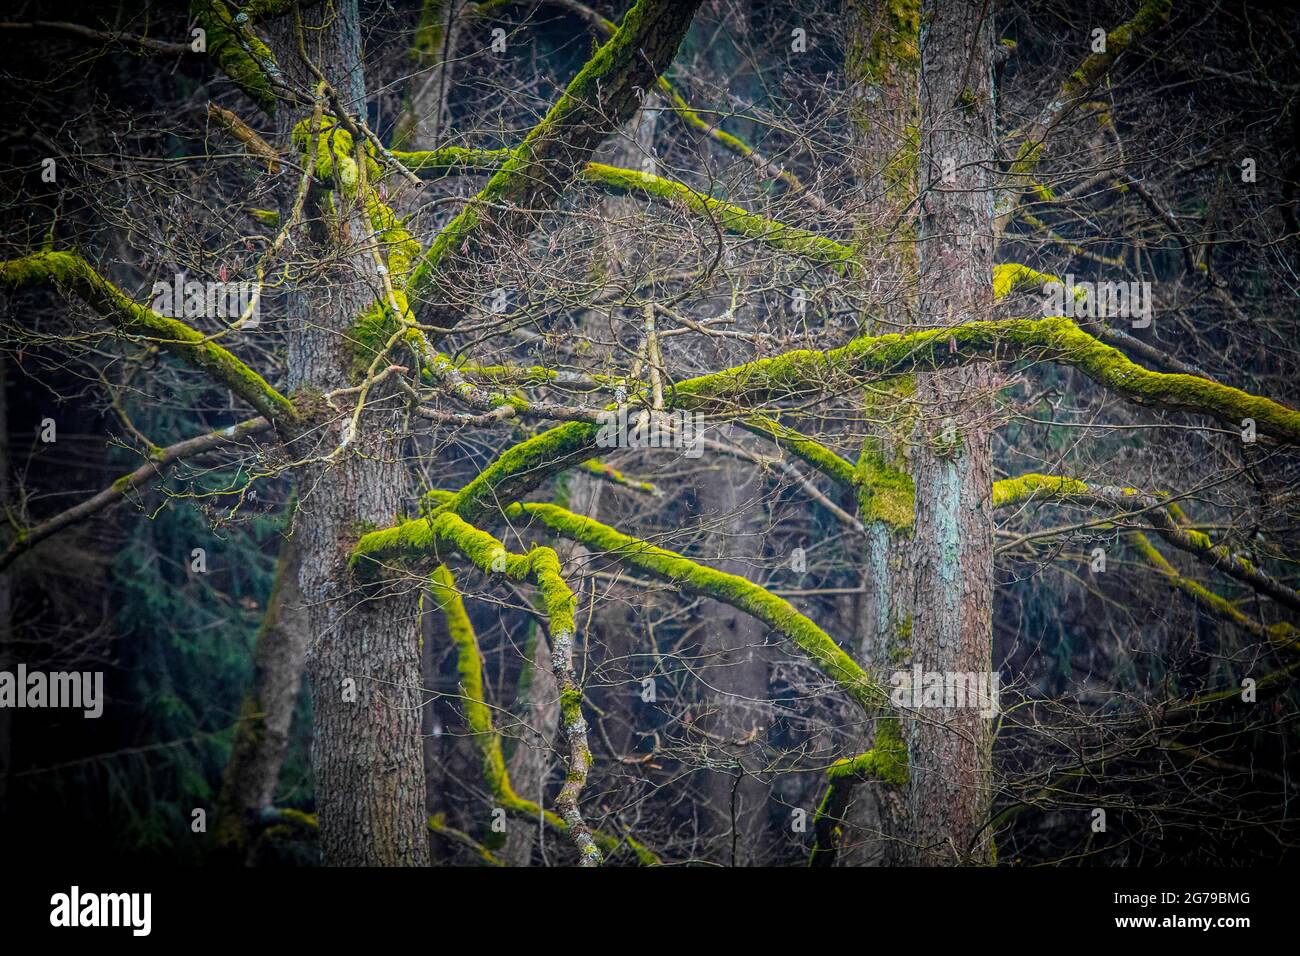 mossy branches on a tree Stock Photo